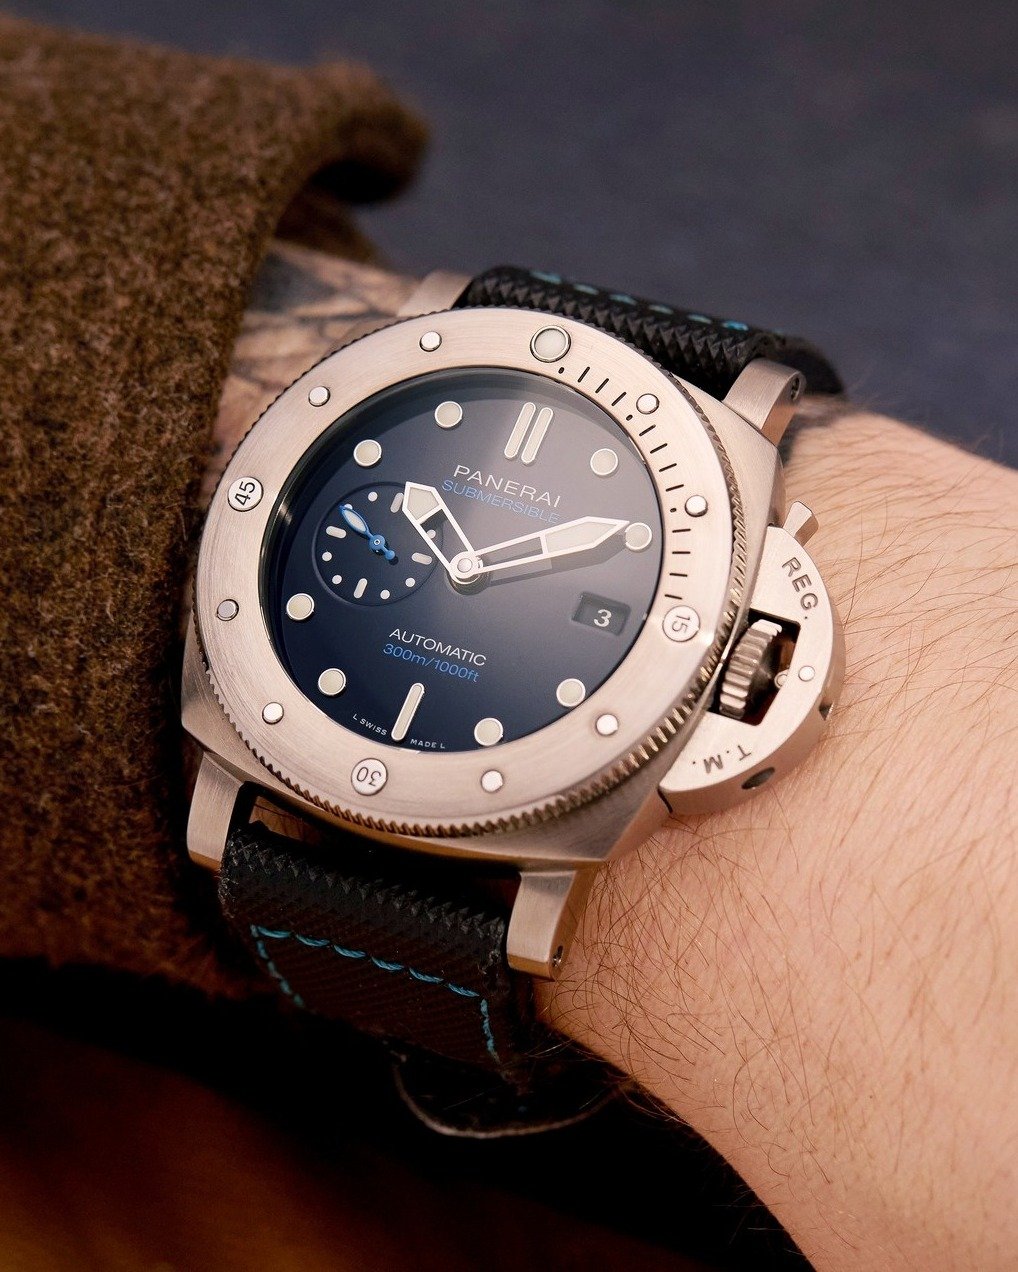 The excitement of owning your perfect watch; leave the search to us. Panerai Submersible Watch, PAM00692 - W011240 #panerai #PaneraiExperience #paneraiclub #paneraiwatch #panerailuminor #watchesuk #thewatchbarnbychrono24 #thewatchbarn #chrono24uk #ch